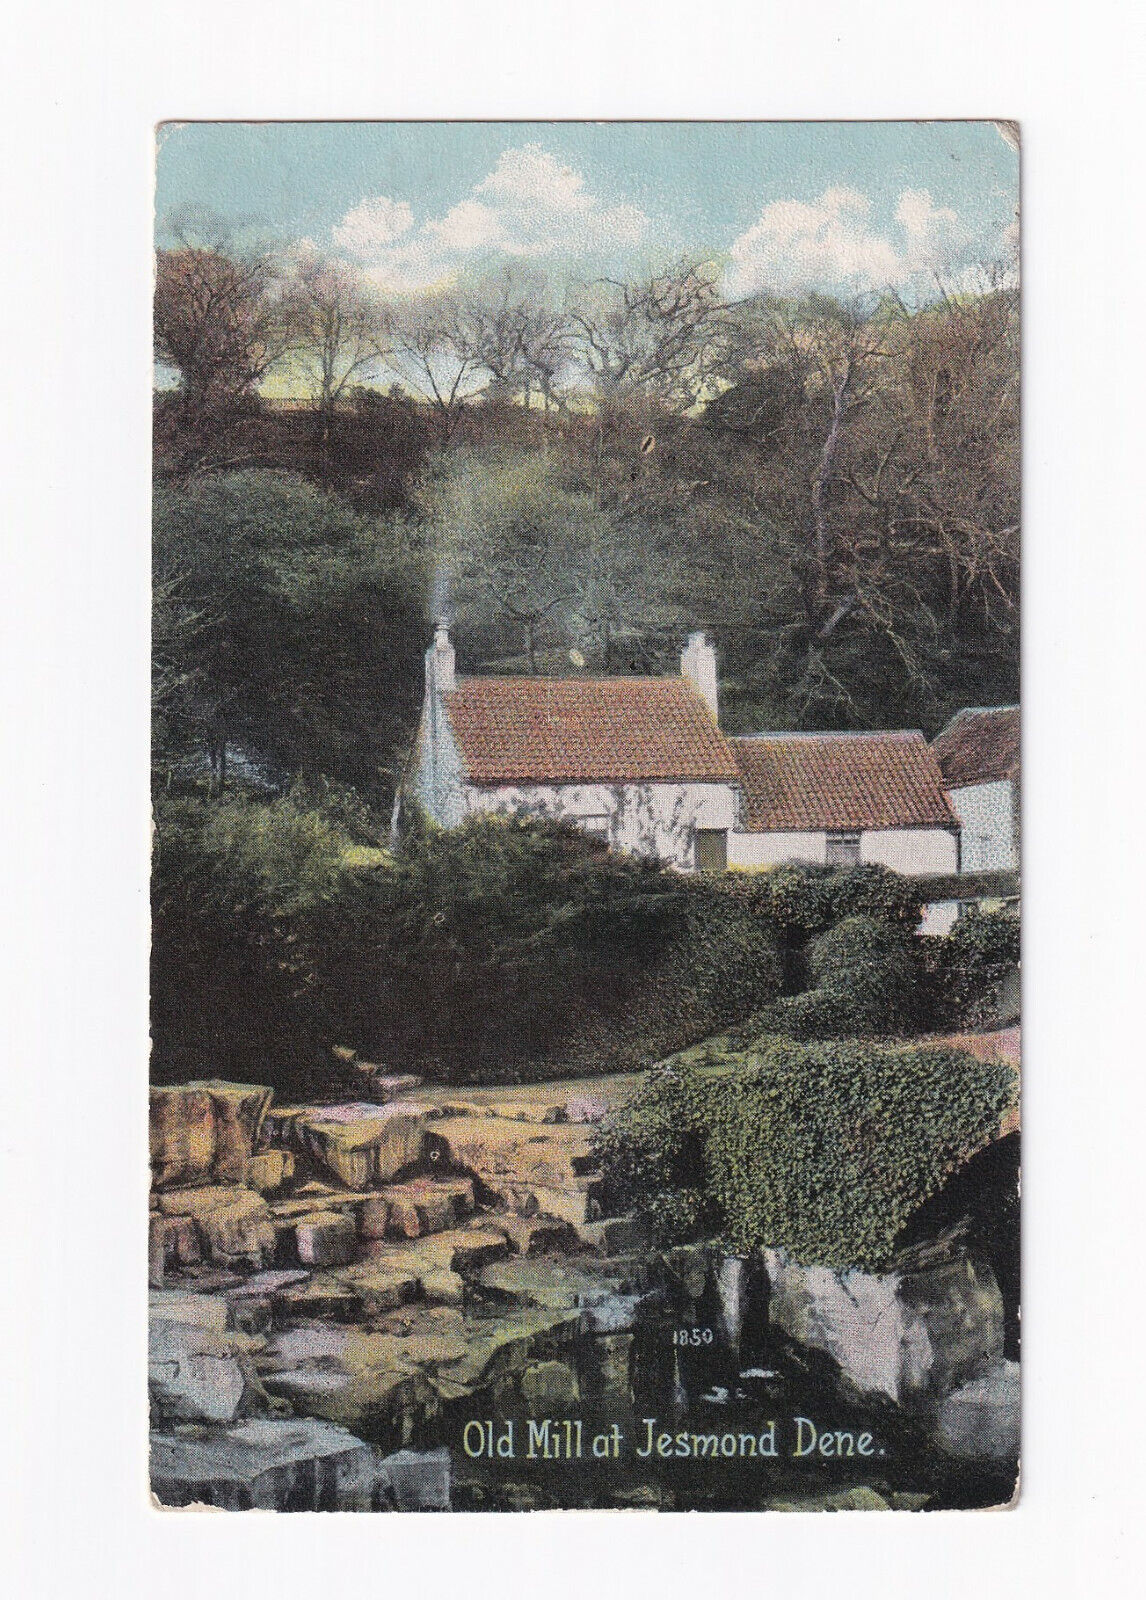 House Clearance - Printed Service, Old Mill at Jesmond Dene